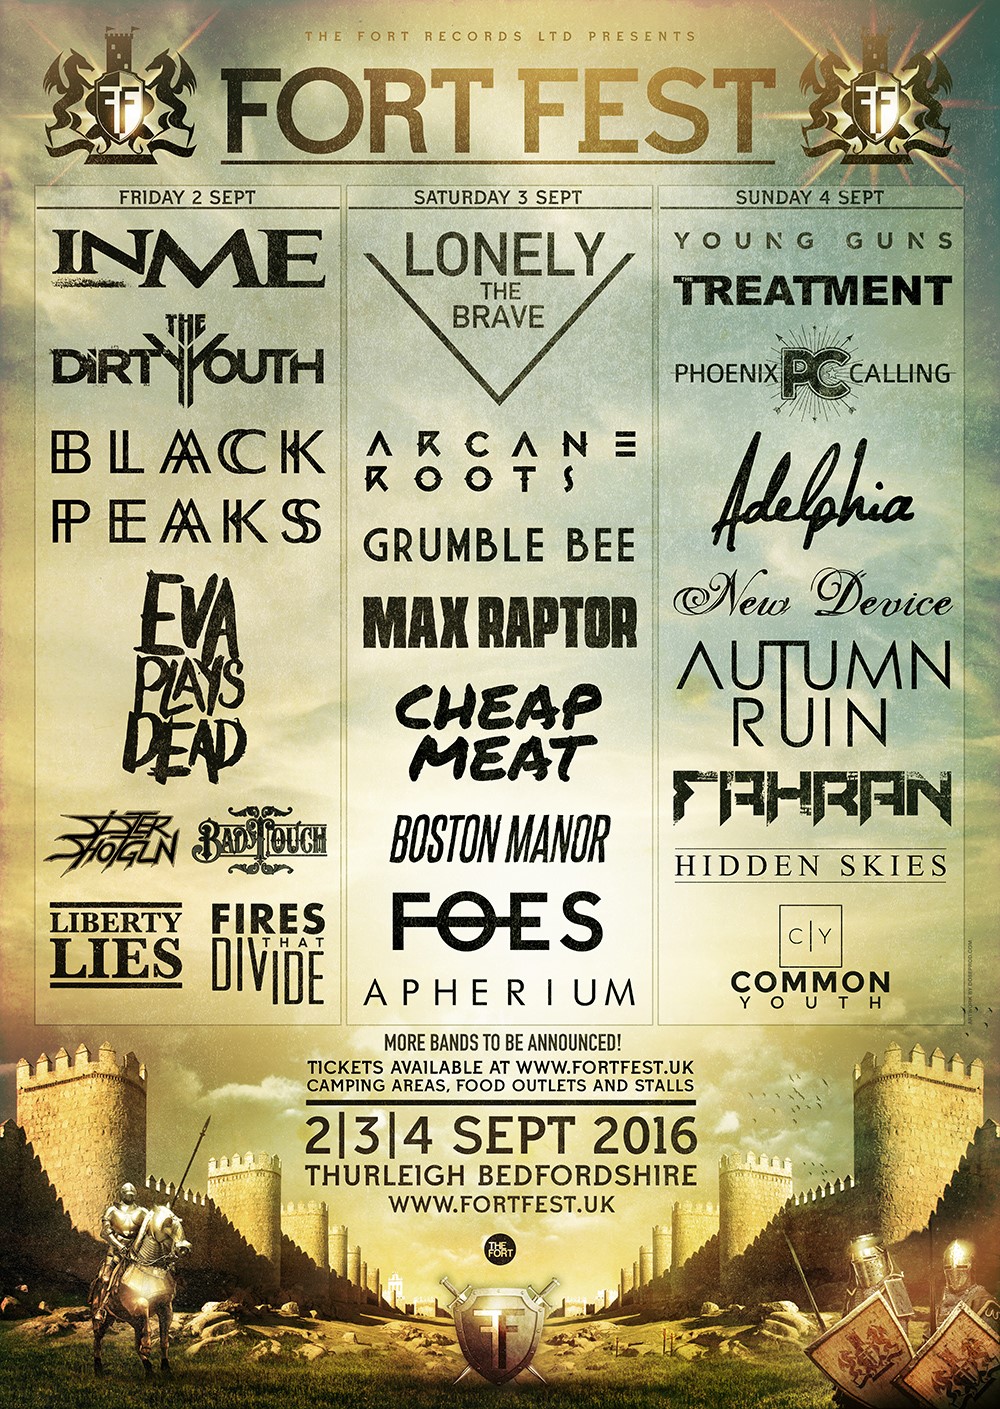 Fort Fest announce second wave of bands!